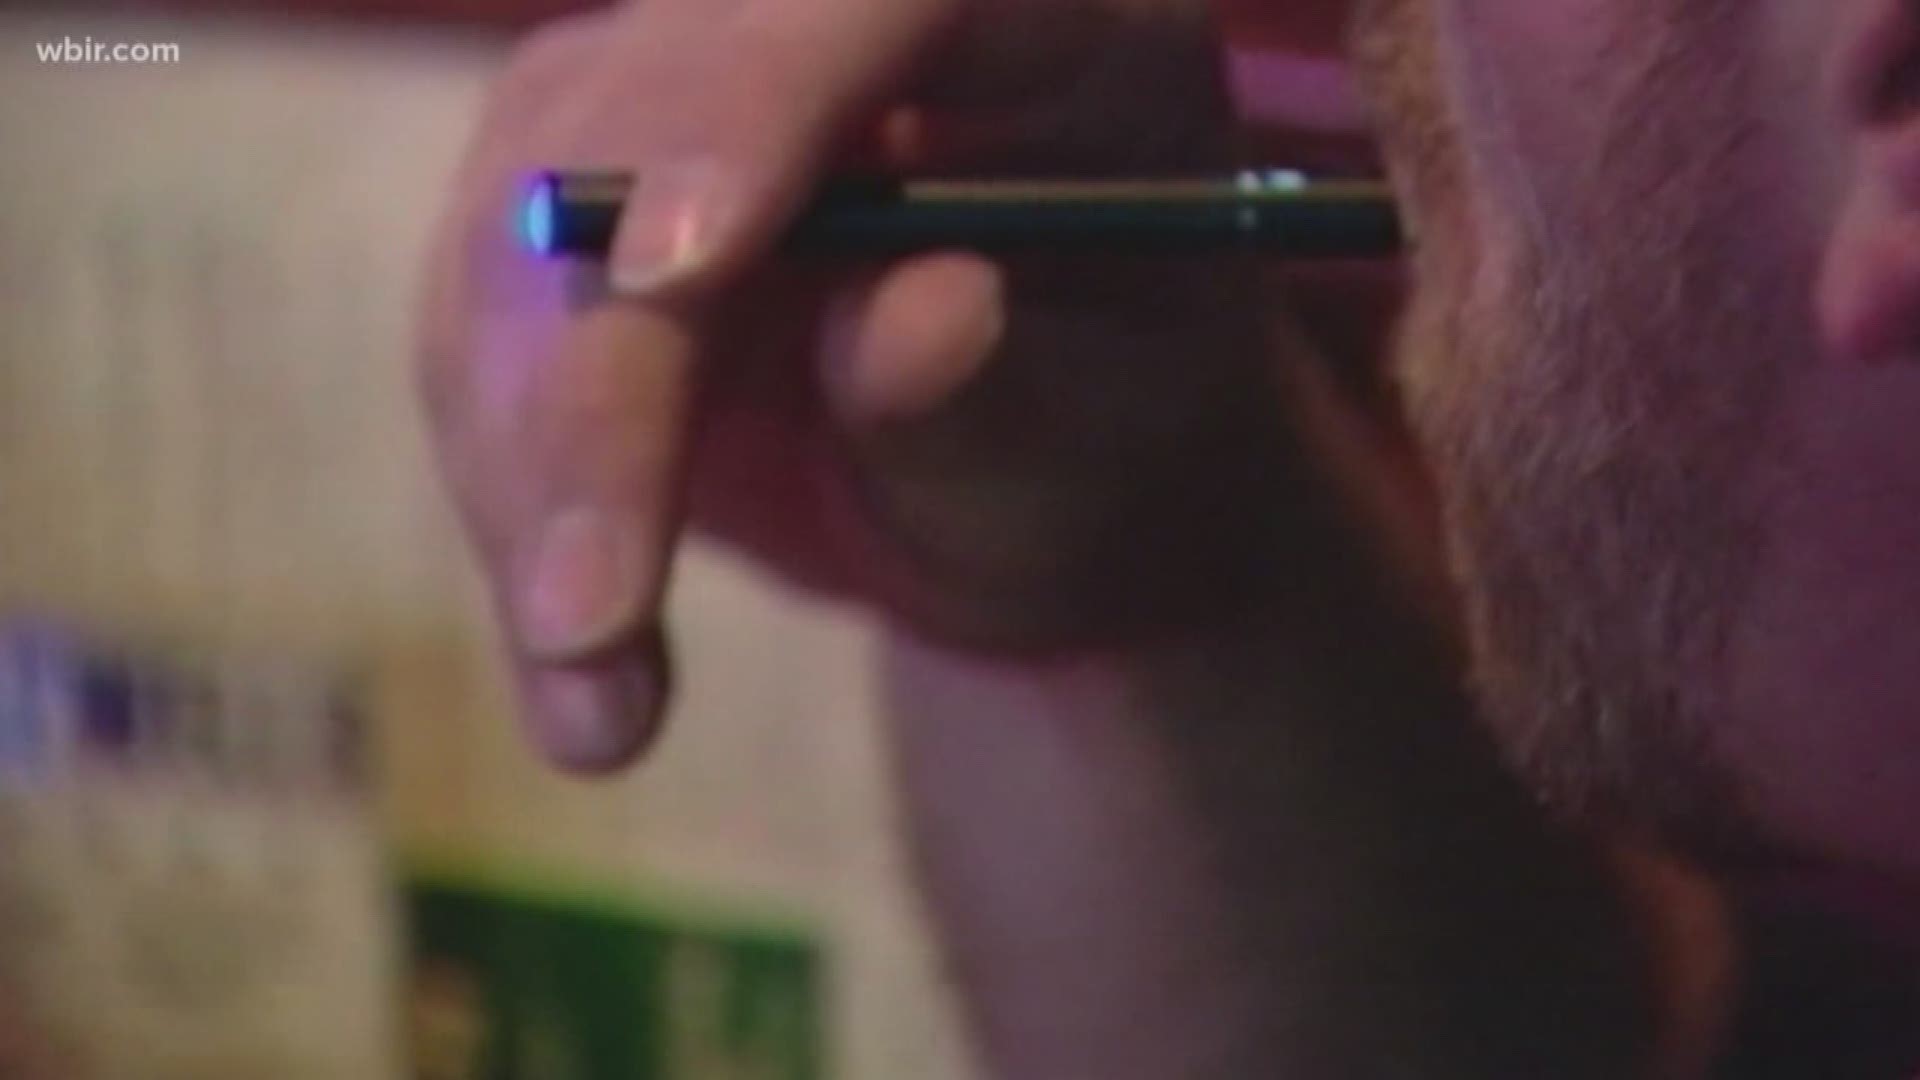 In Knox County -- almost 15 percent of high school students reported they use some type of e-cigarette.